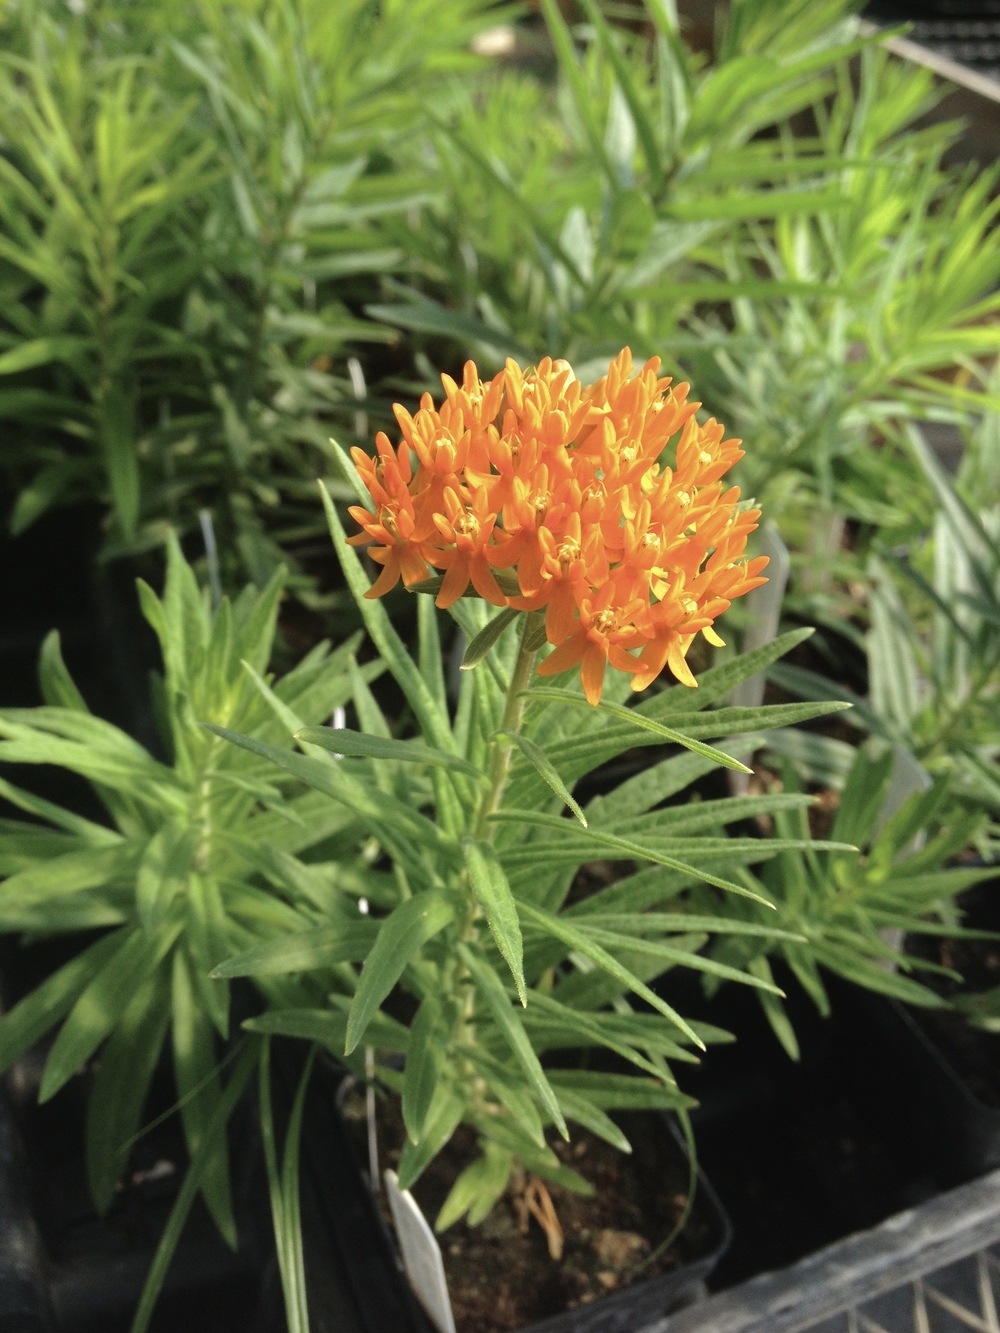 Butterfly milkweed (Asclepias tuberosa) blooming in the greenhouse